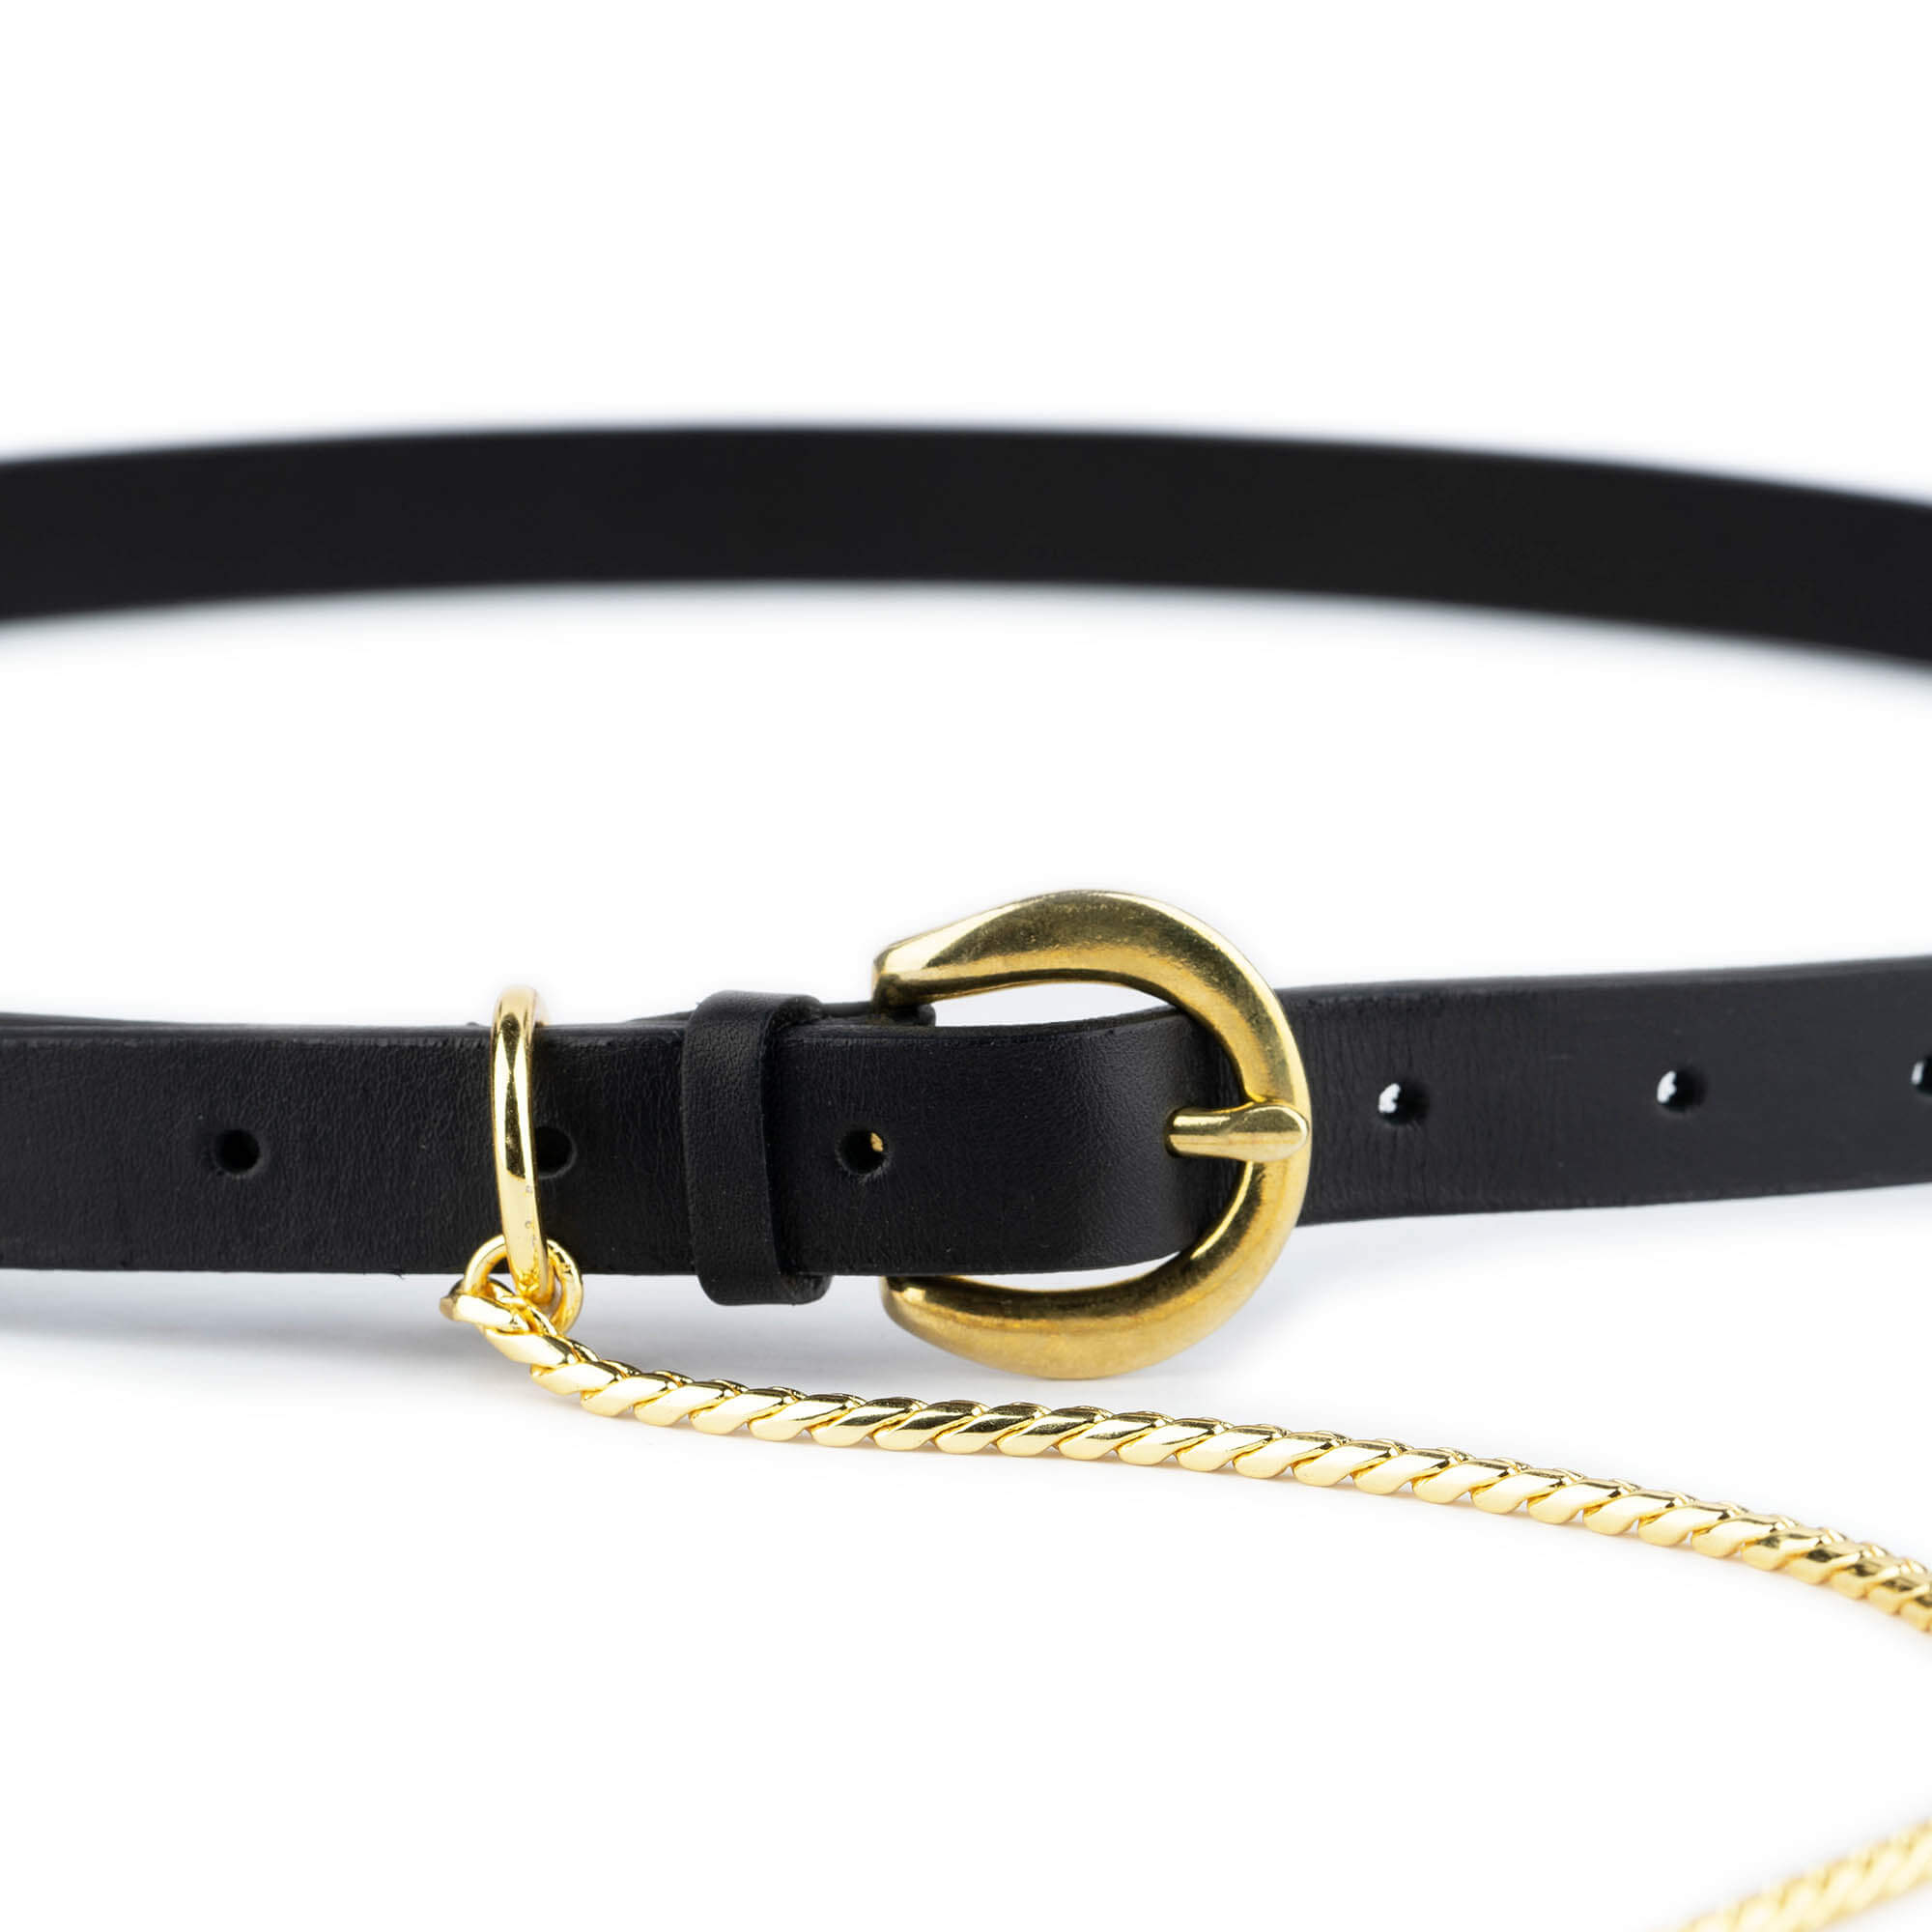 Buy Womens Black Leather Belt With Gold Snake Chain | Capo